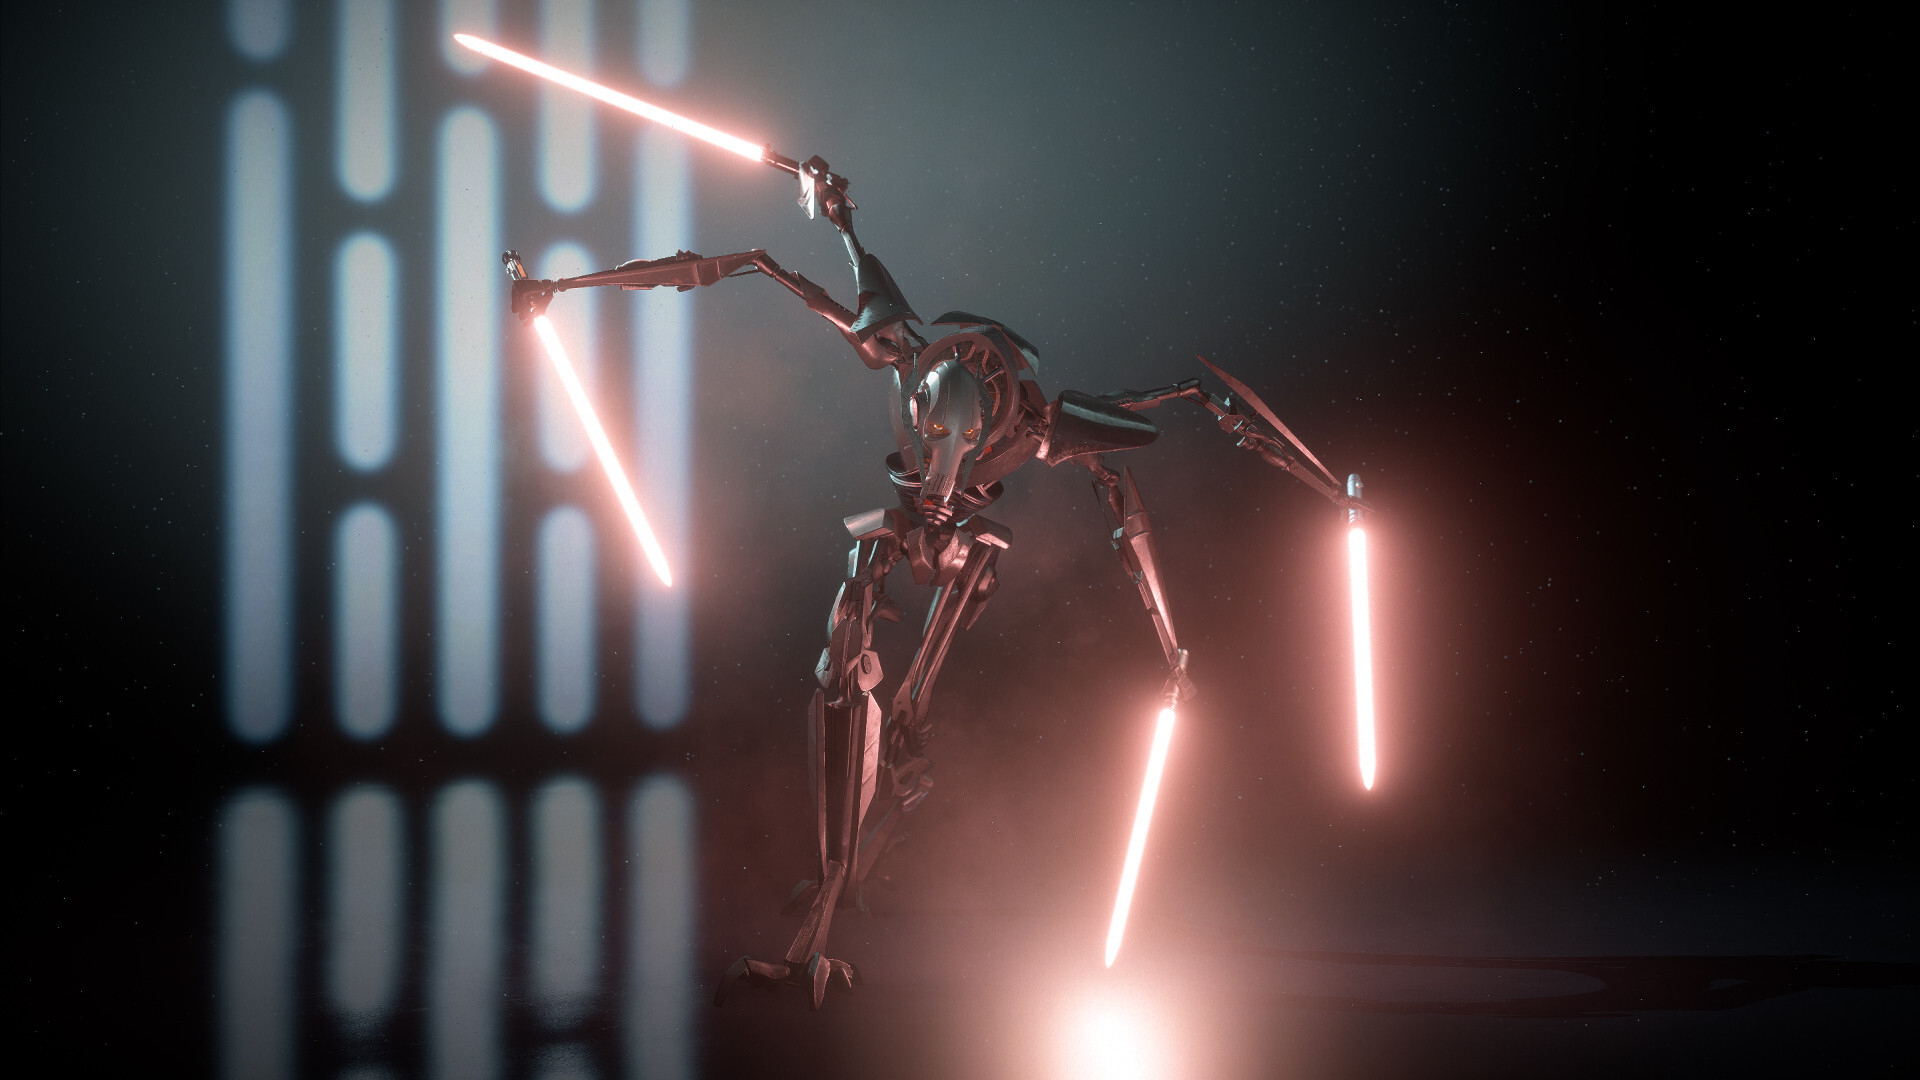 General Grievous: Star Wars: Battlefront II, Sith, Sci-fi games, The de facto leader of the entire Separatist Alliance. 1920x1080 Full HD Background.